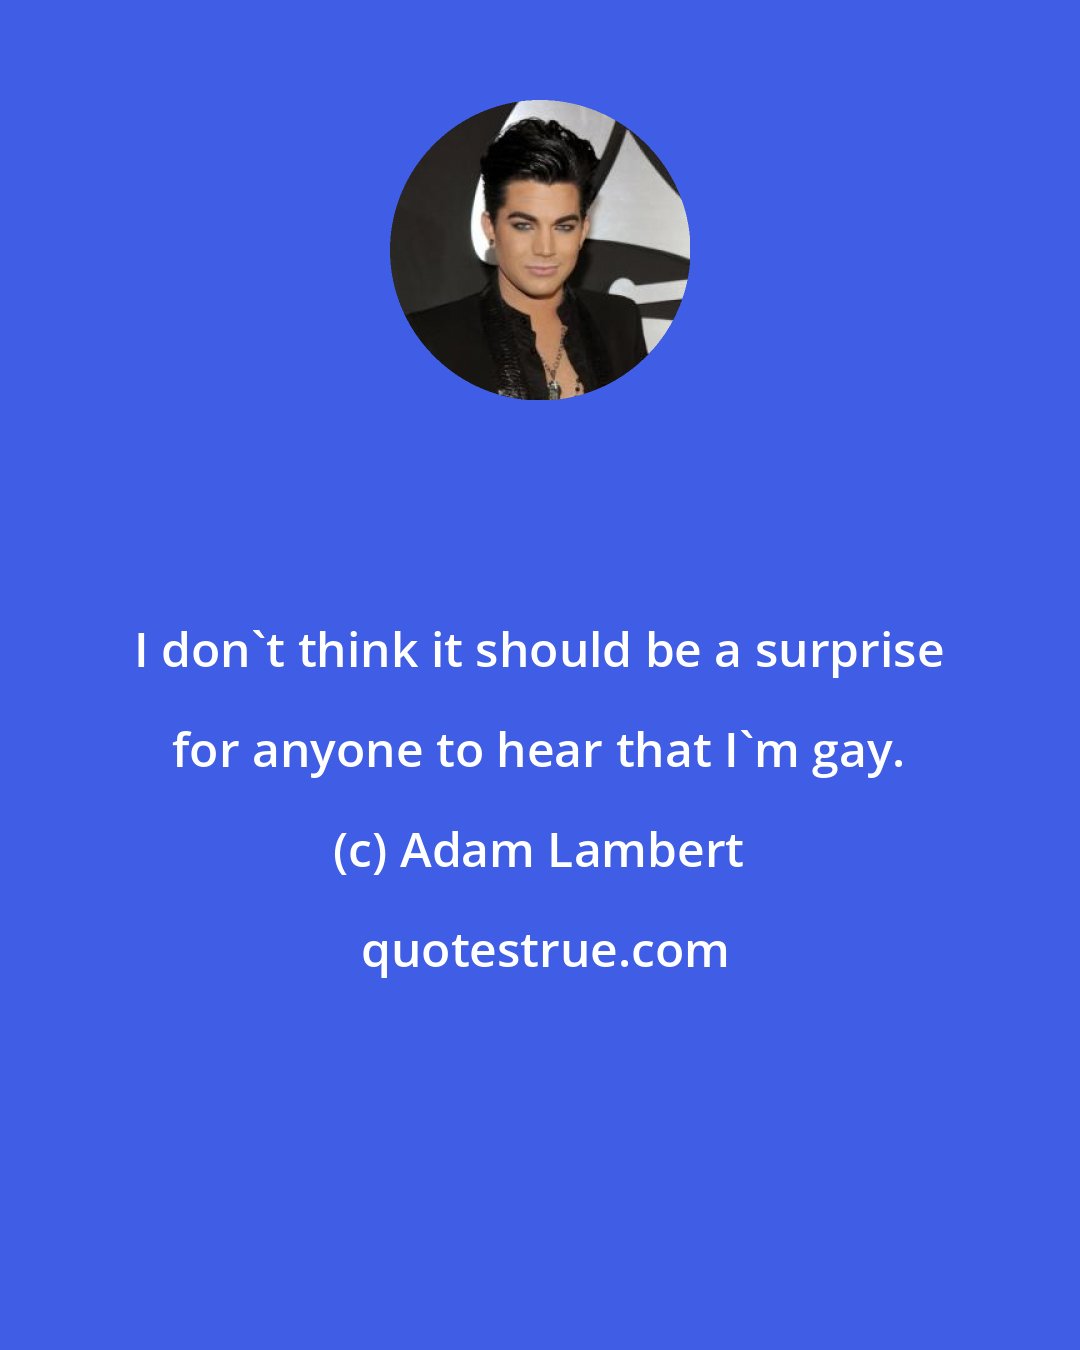 Adam Lambert: I don't think it should be a surprise for anyone to hear that I'm gay.